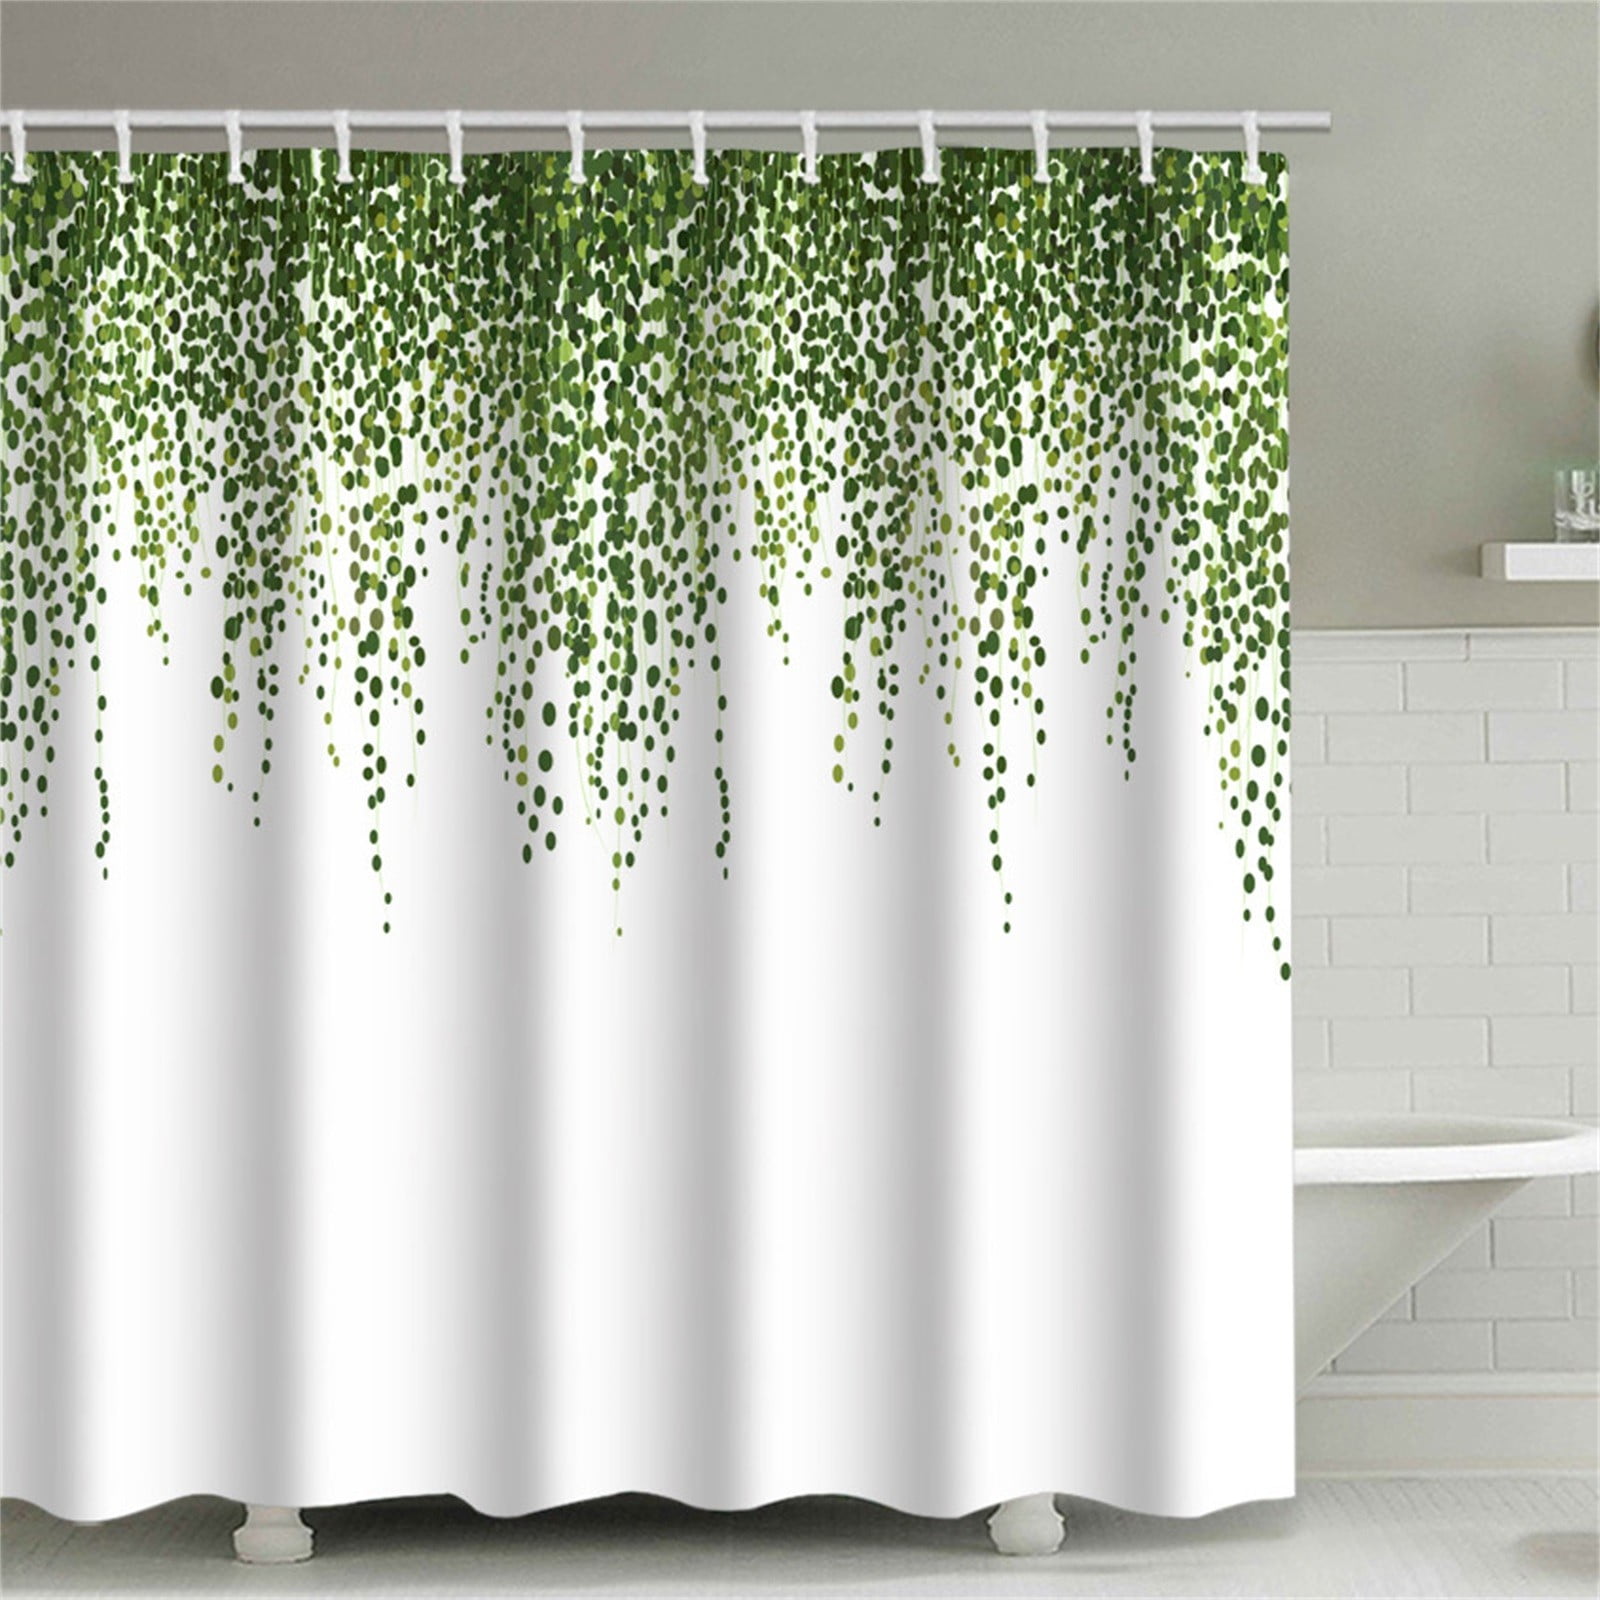 Shower Curtain, Polyester Fabric, Extra Long Bath Curtains, Waterproof  Anti-mold Bathroom Decor, Home Accessories With Curtain  Hooksvolume_upcontent_c